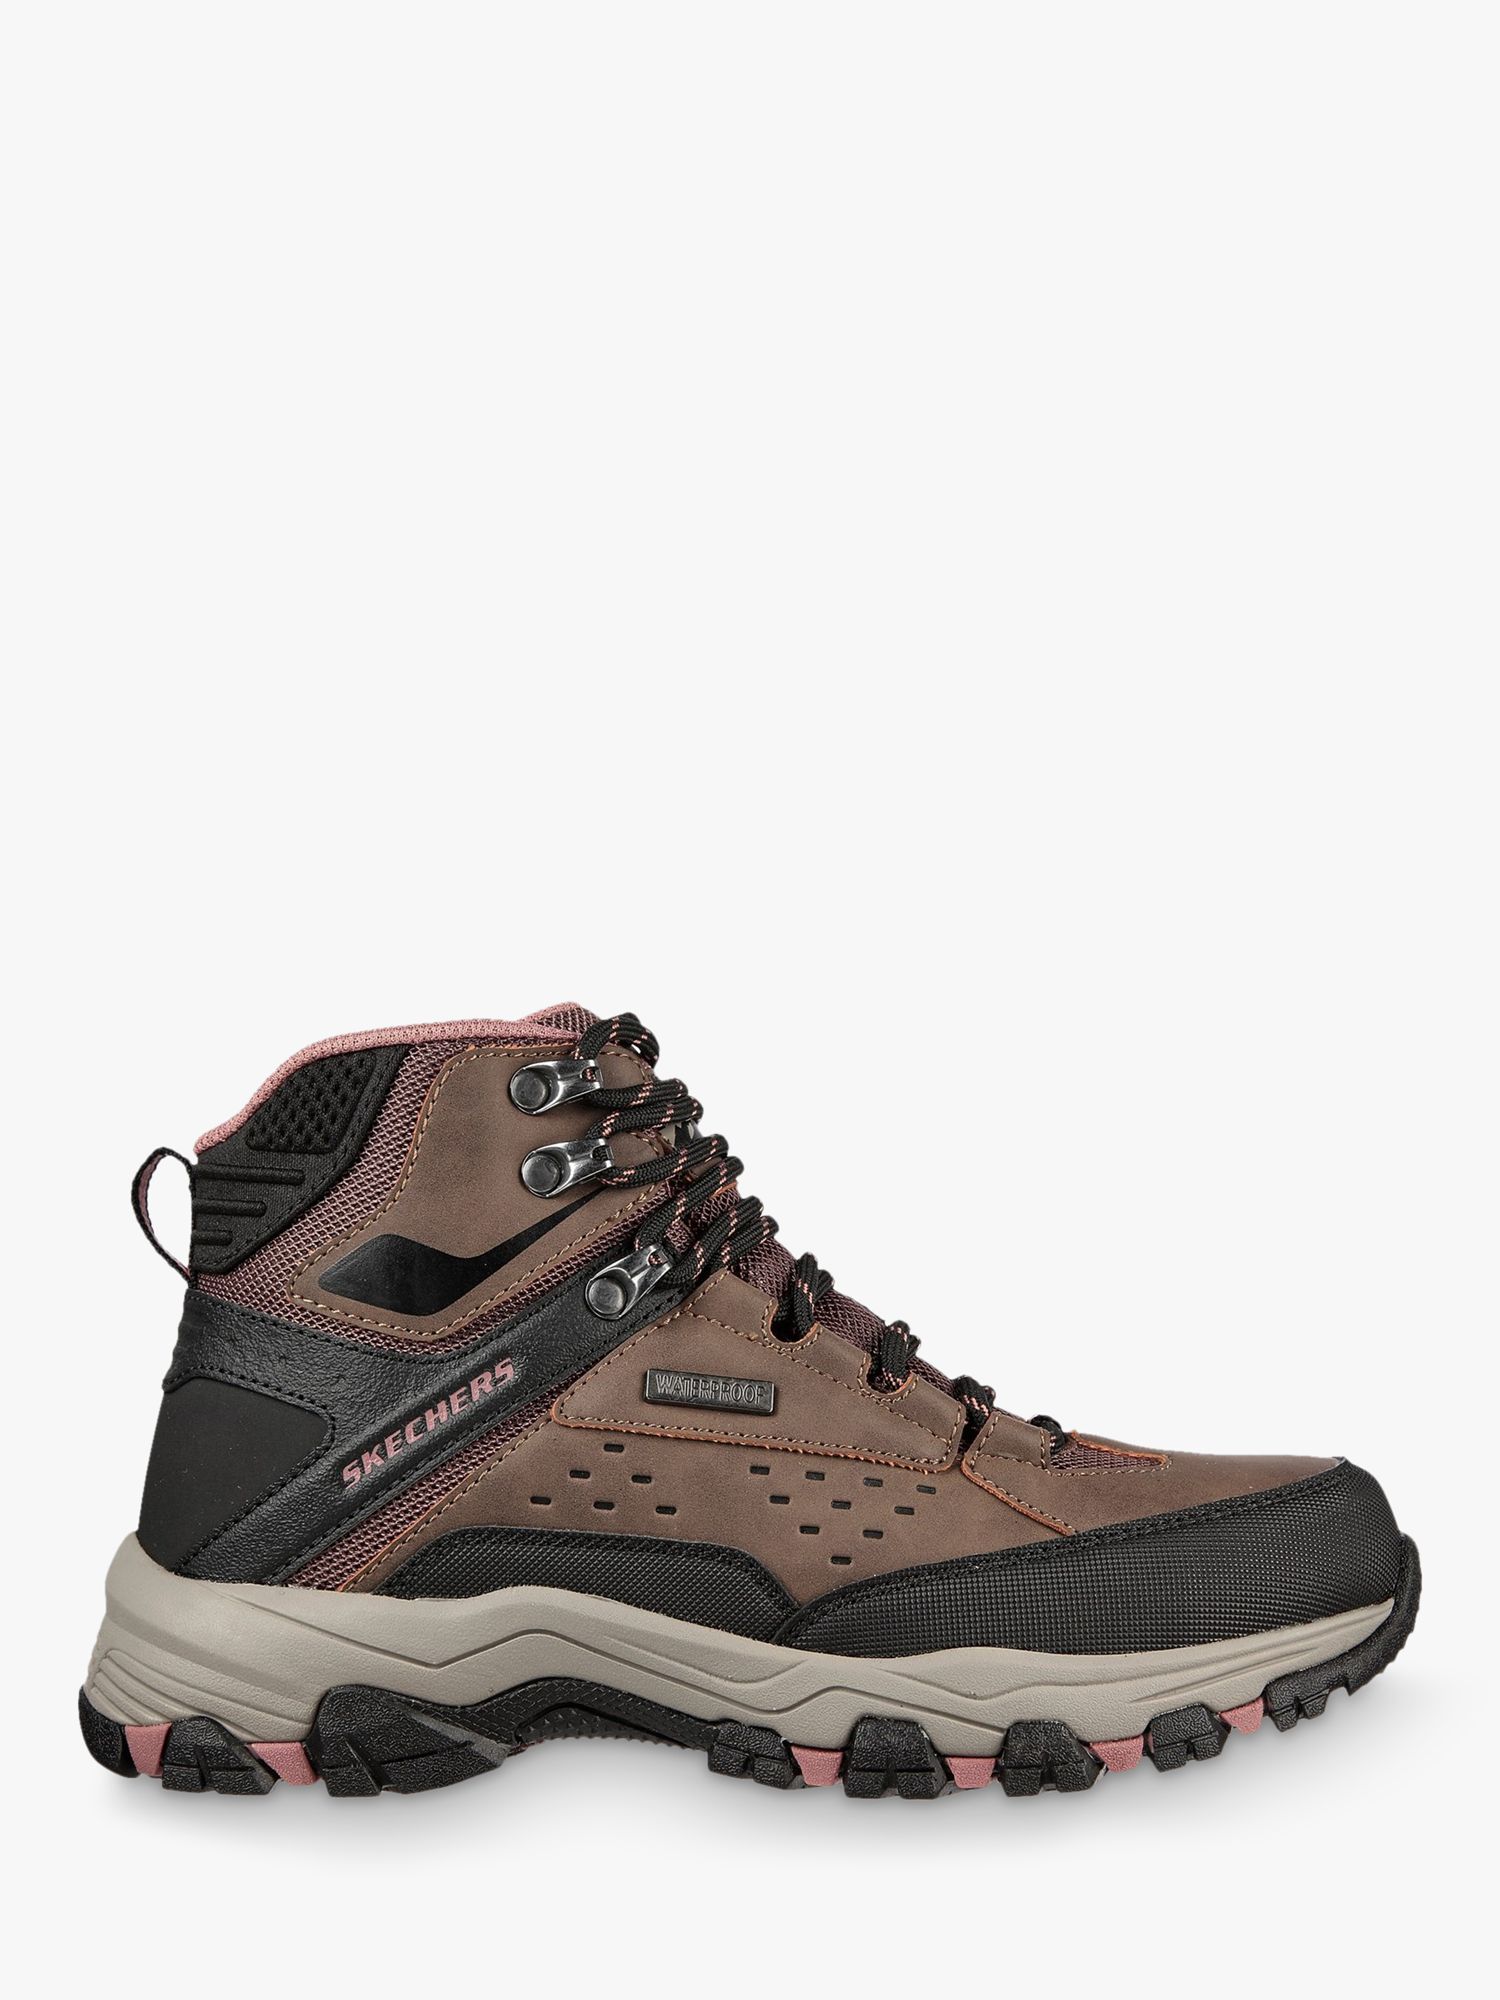 Skechers Relaxed Selmen Turf Hiking Boots, Chocolate,